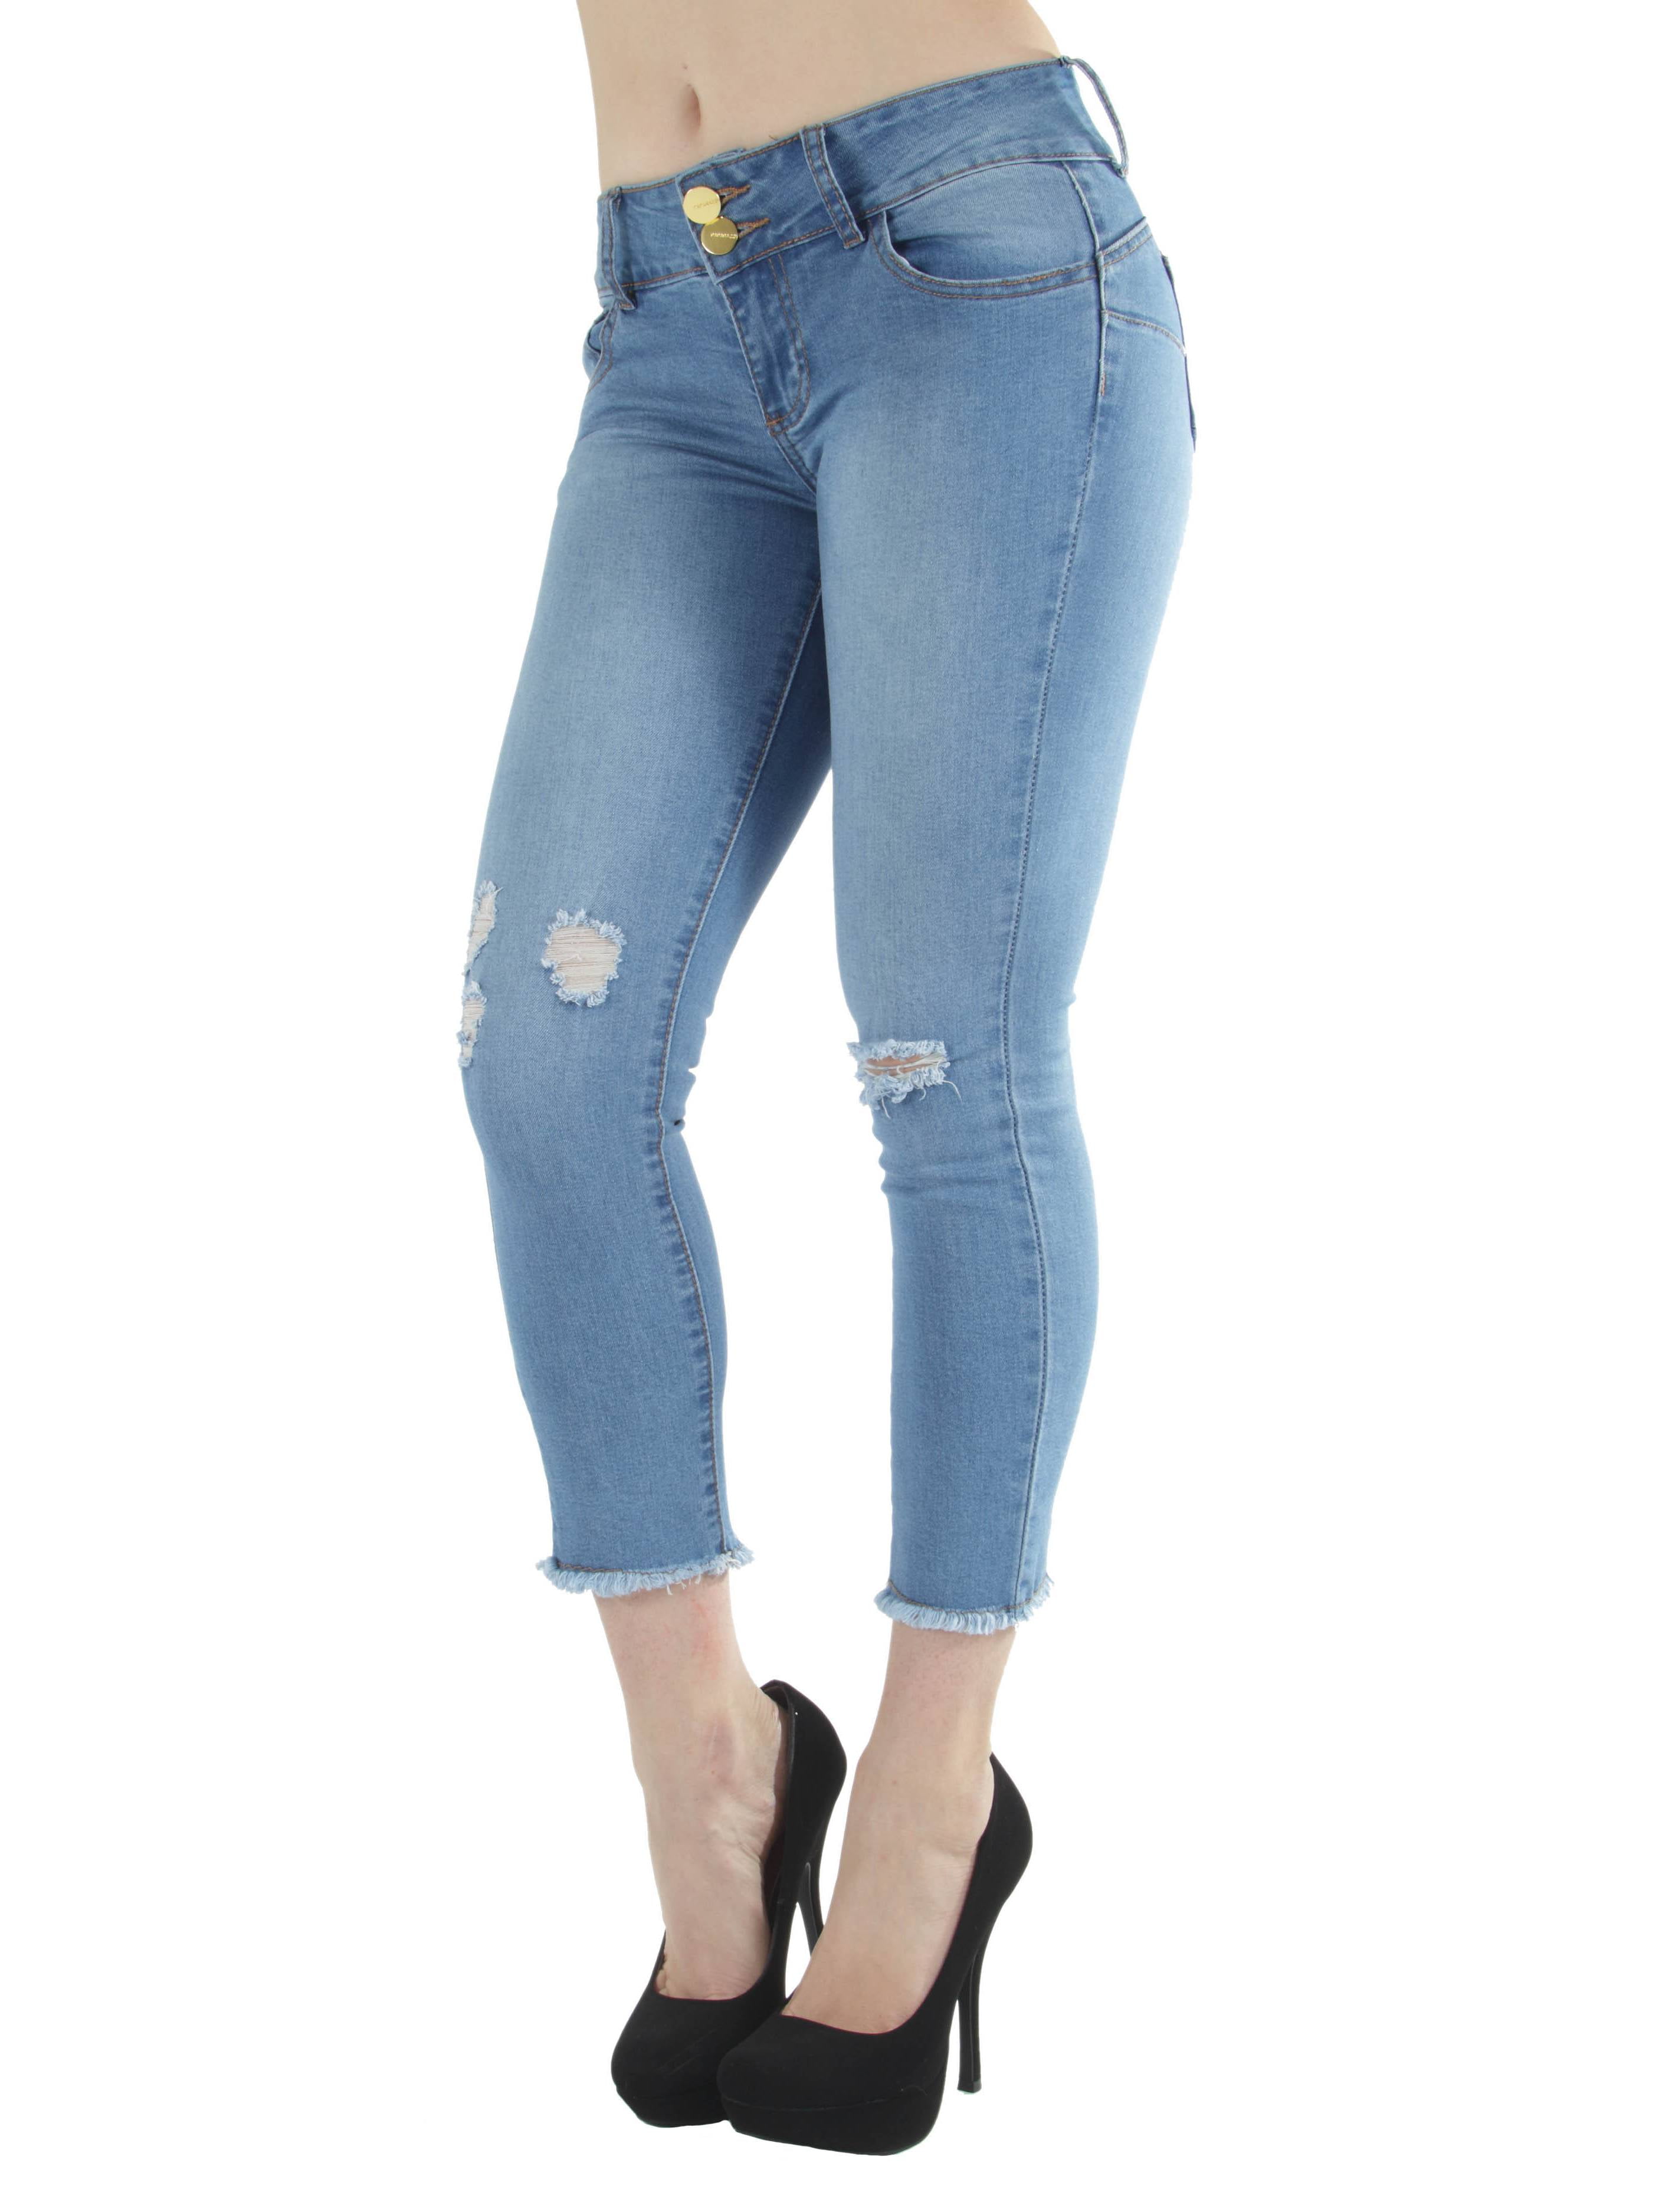 above the ankle jeans